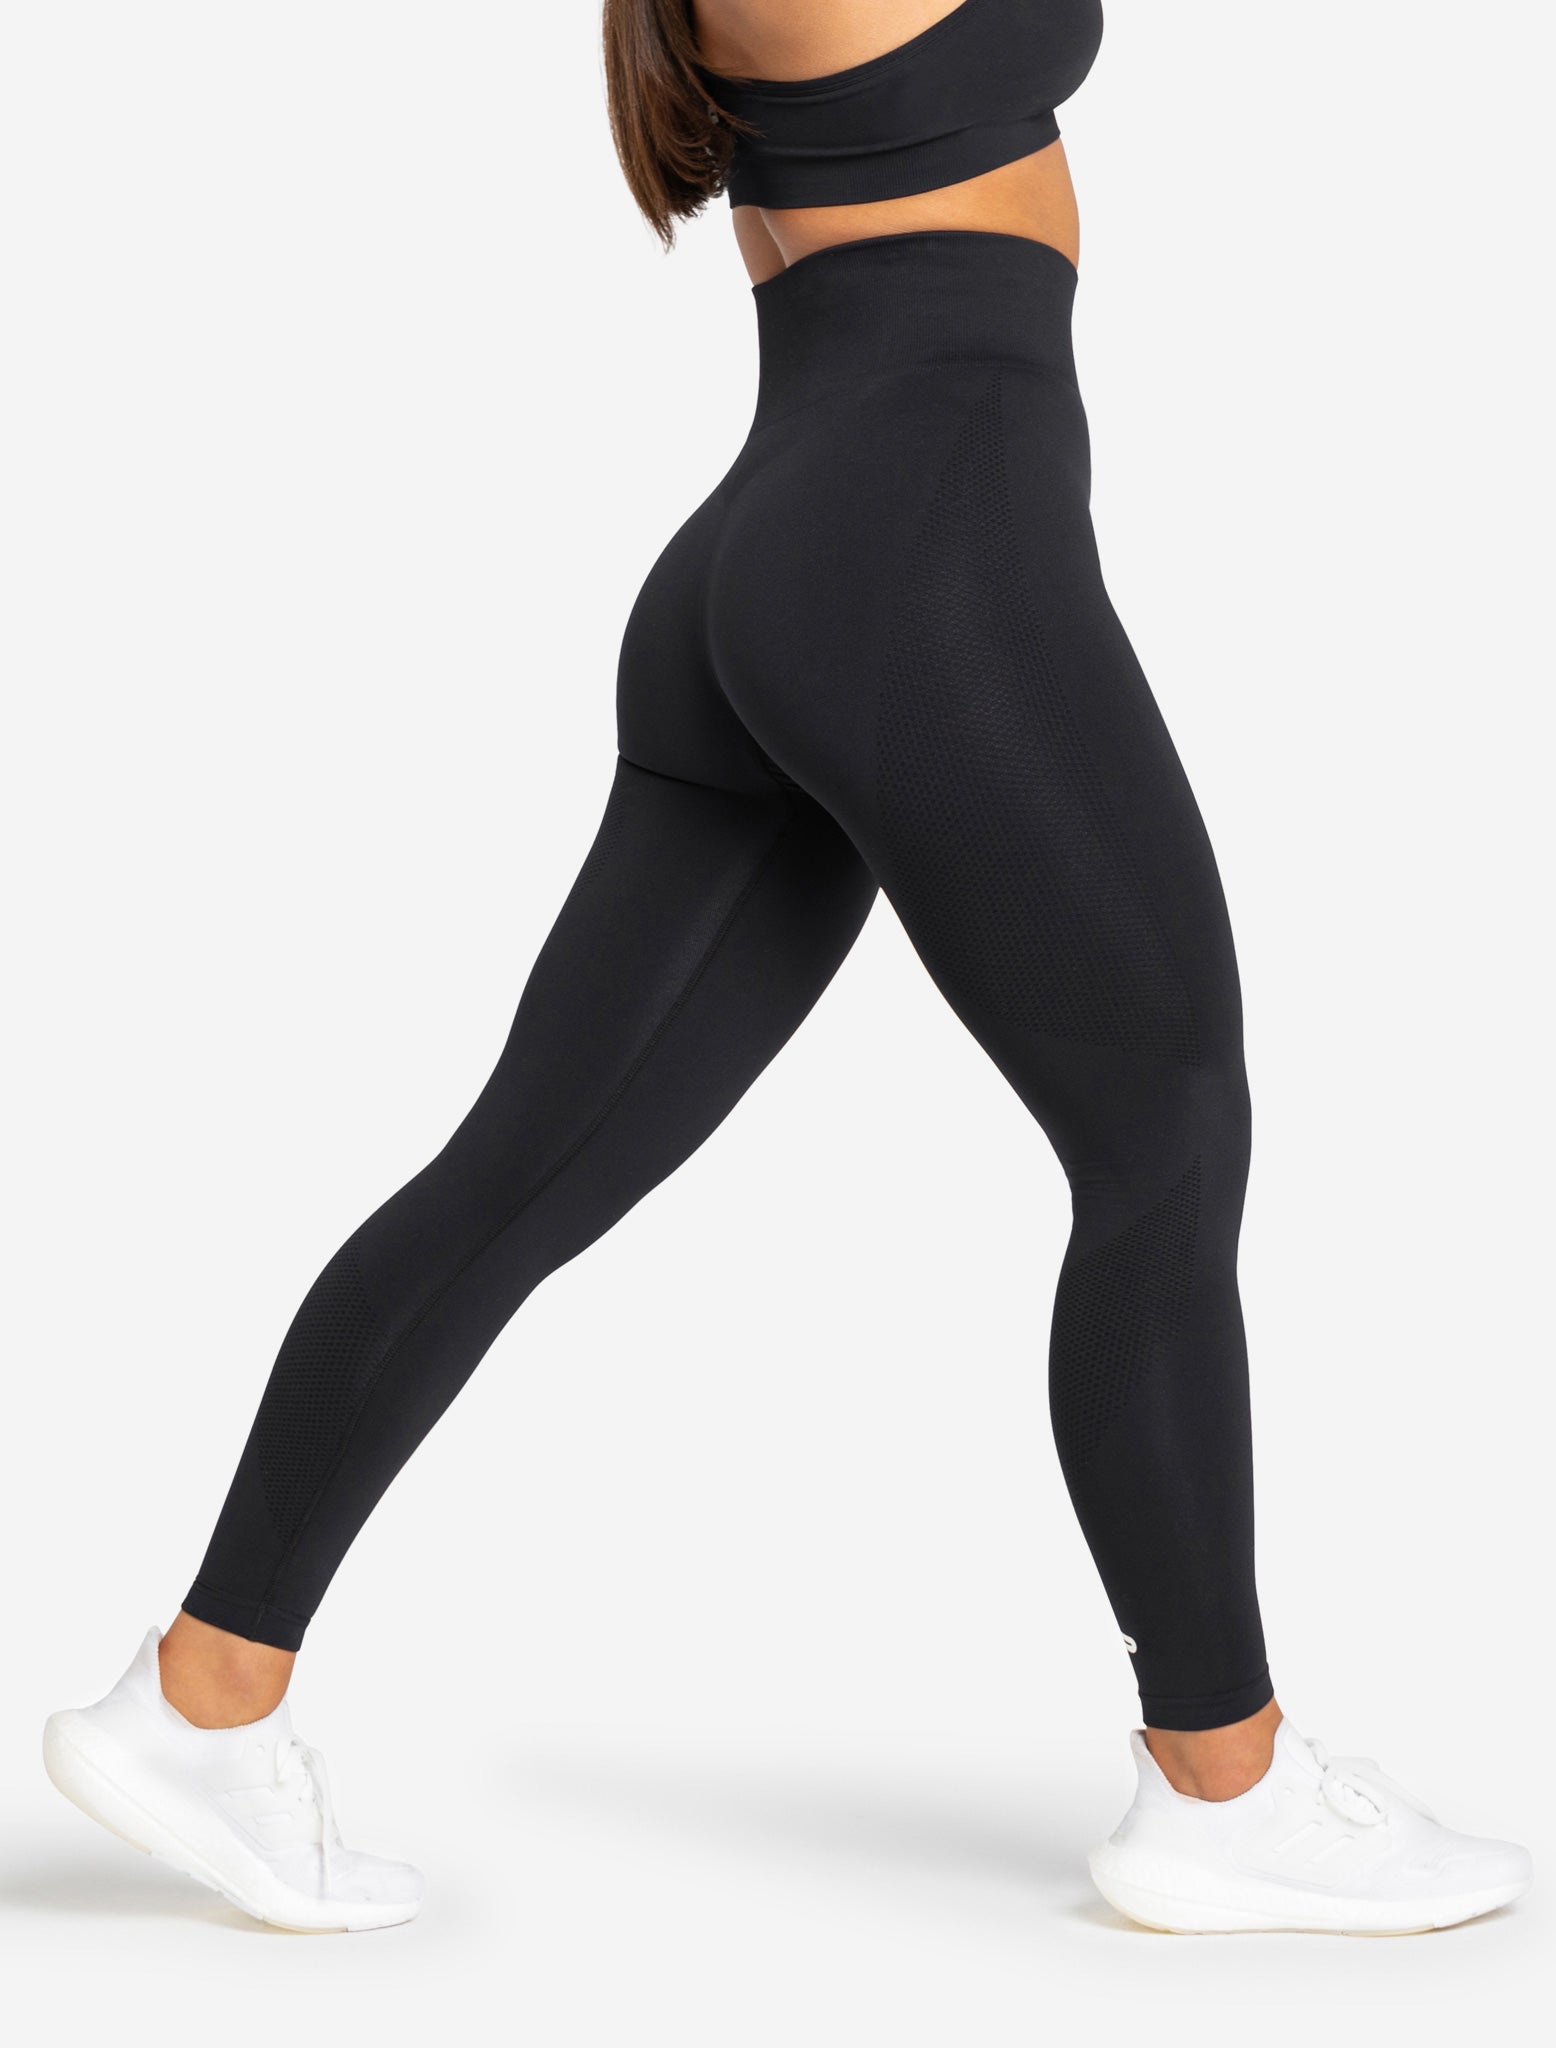 Nike Gym Clothing for Women | Gym clothes women, Gym outfit, Womens  activewear